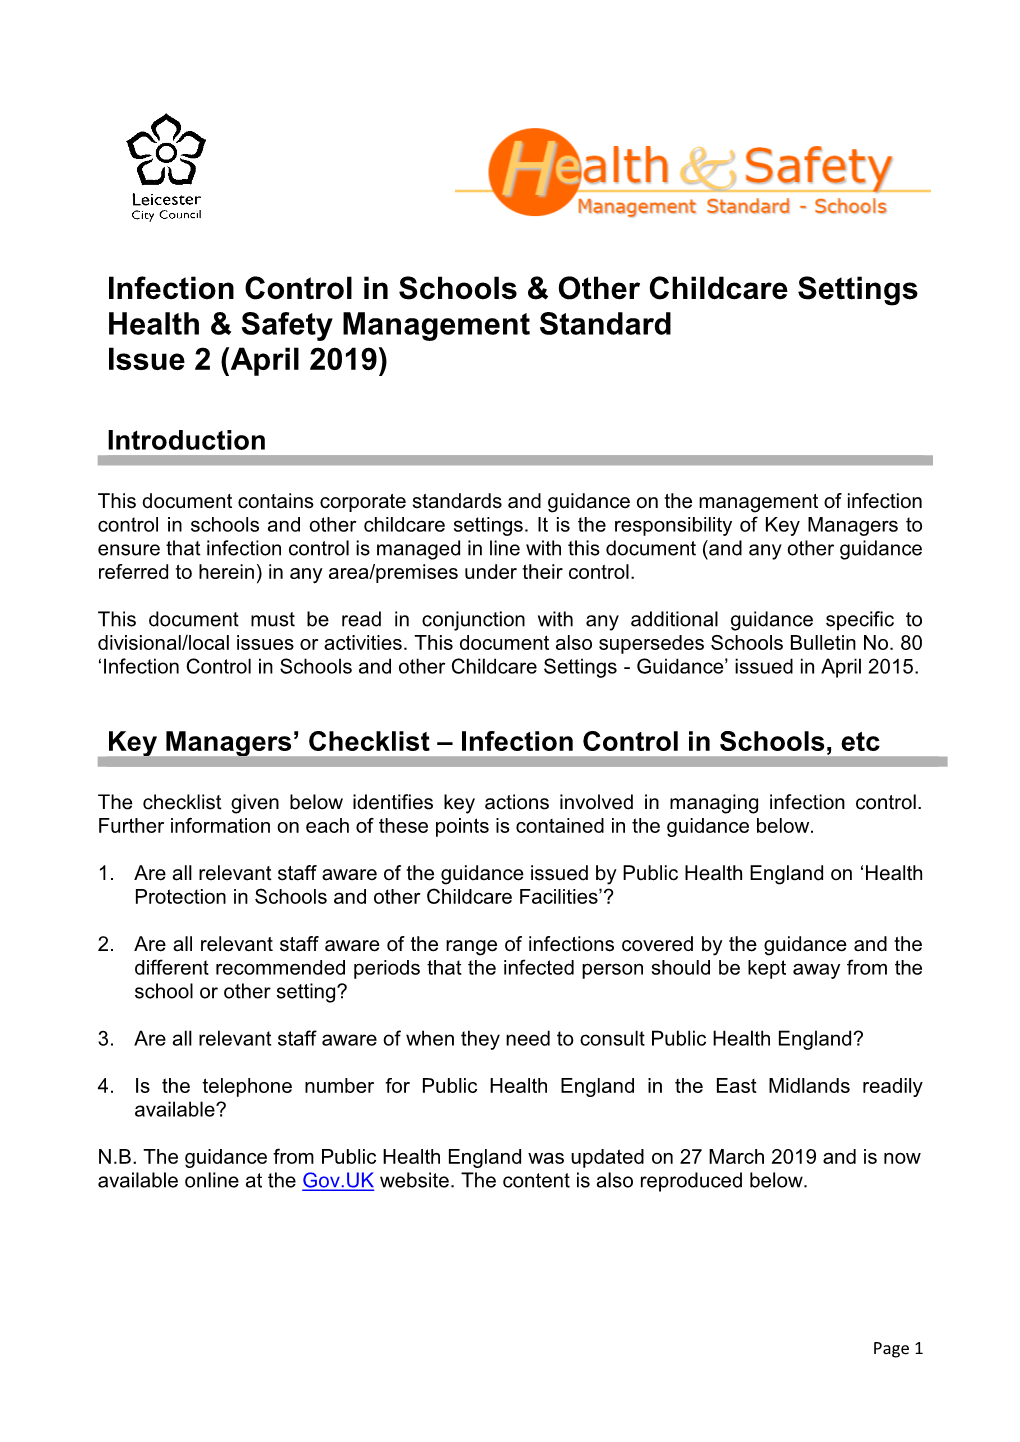 Infection Control in Schools & Other Childcare Settings Health & Safety